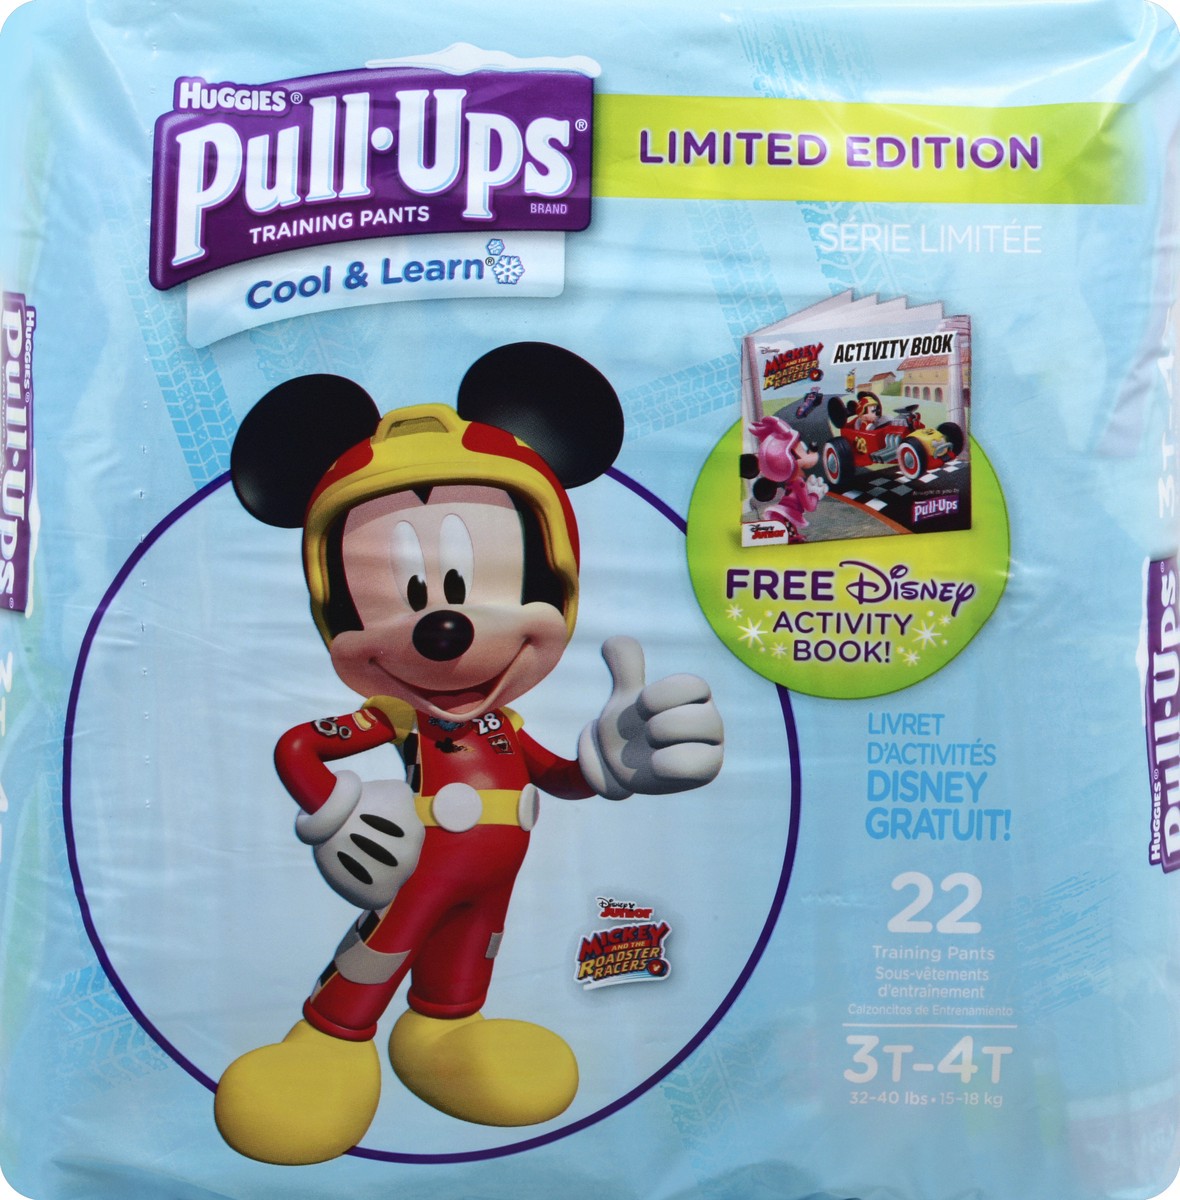 Huggies 22 Pull UPS Training Pants 3t - 4t Boys 32-40 Pounds Lbs for sale  online